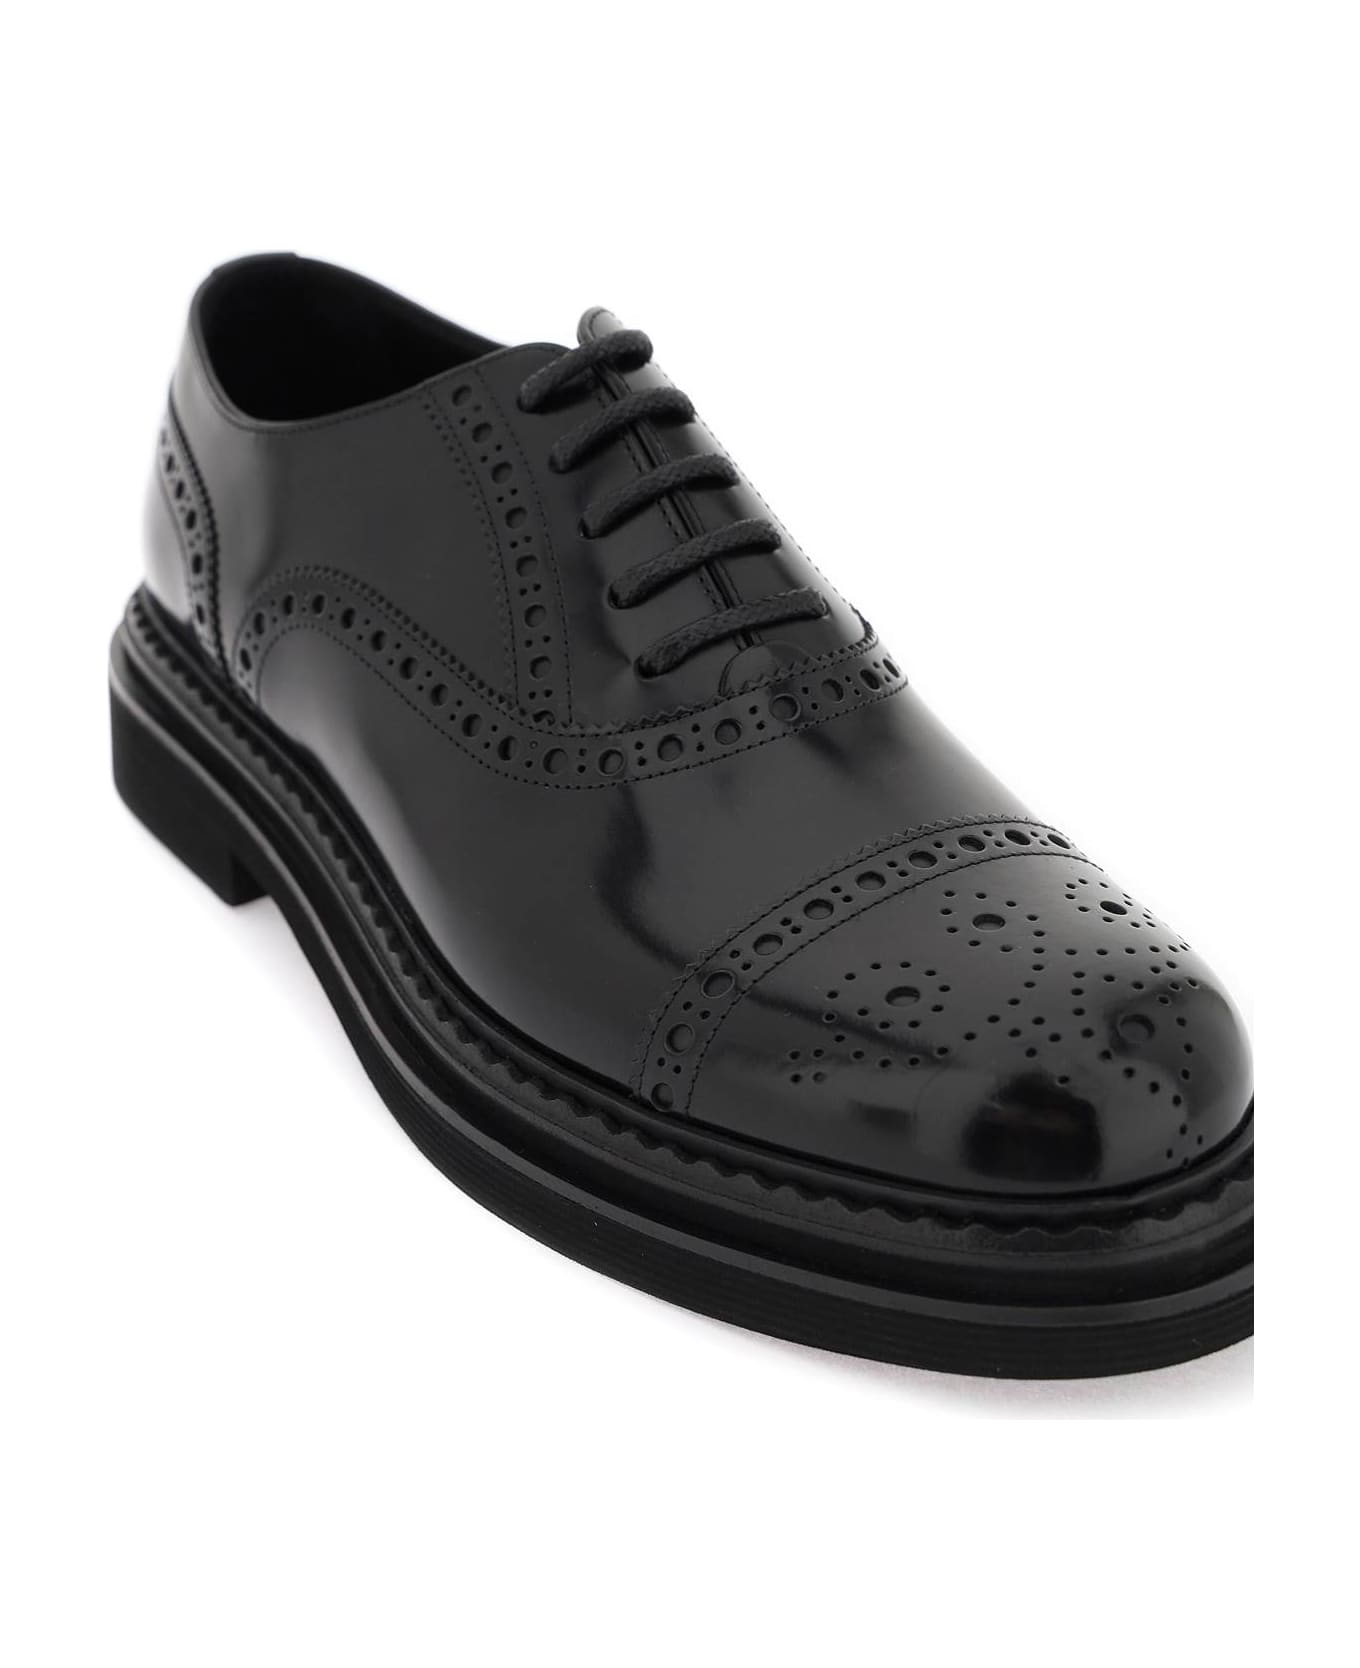 Dolce & Gabbana Leather Lace Up Shoes - Black